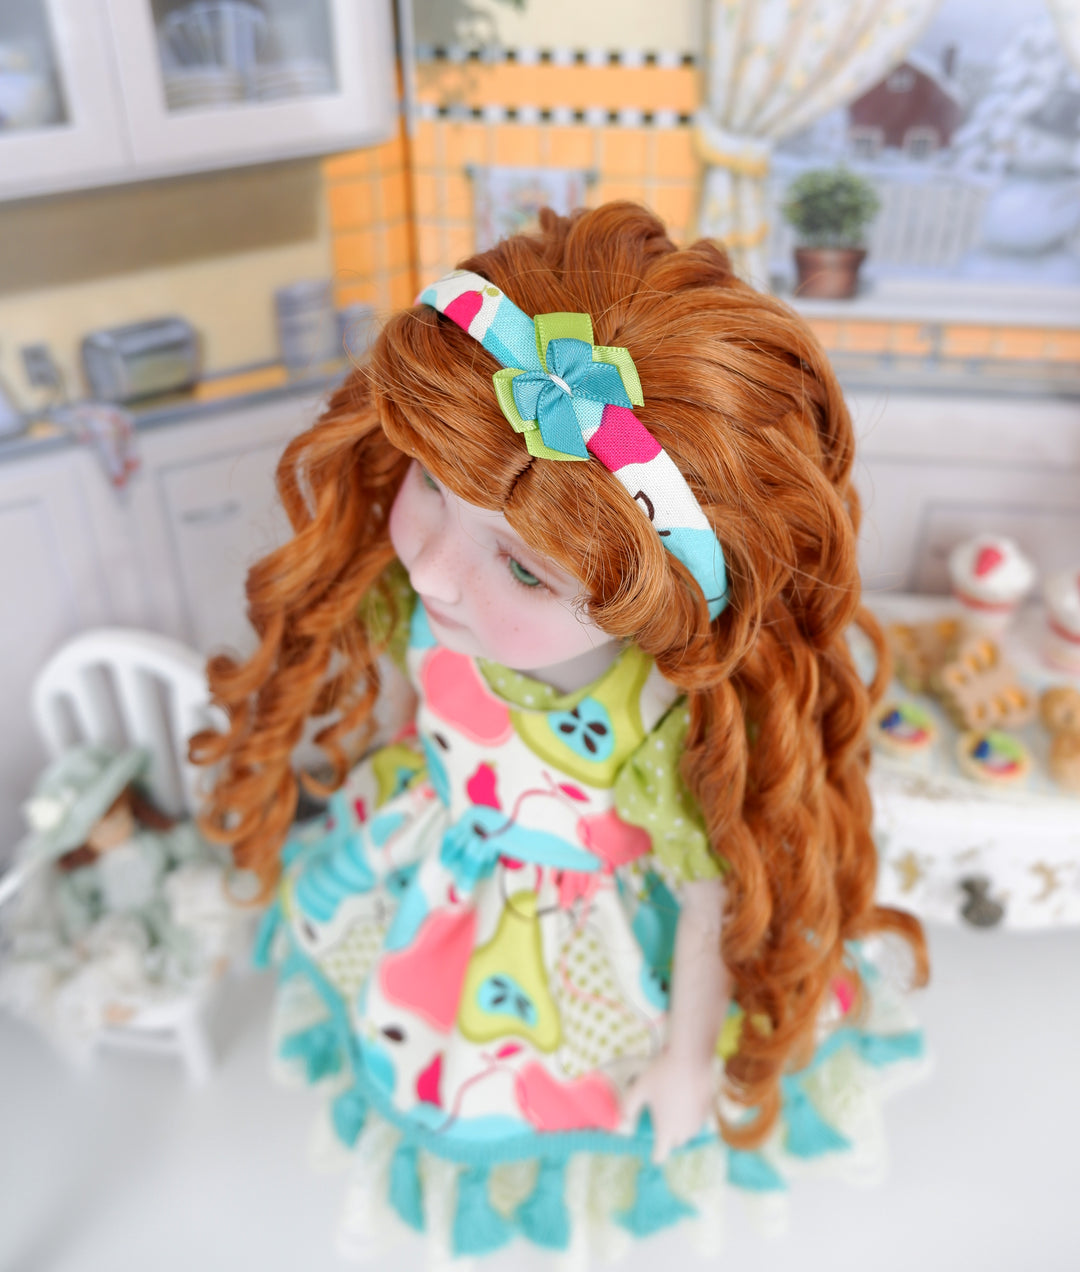 Perfect Pear - dress & pinafore with shoes for Ruby Red Fashion Friends doll